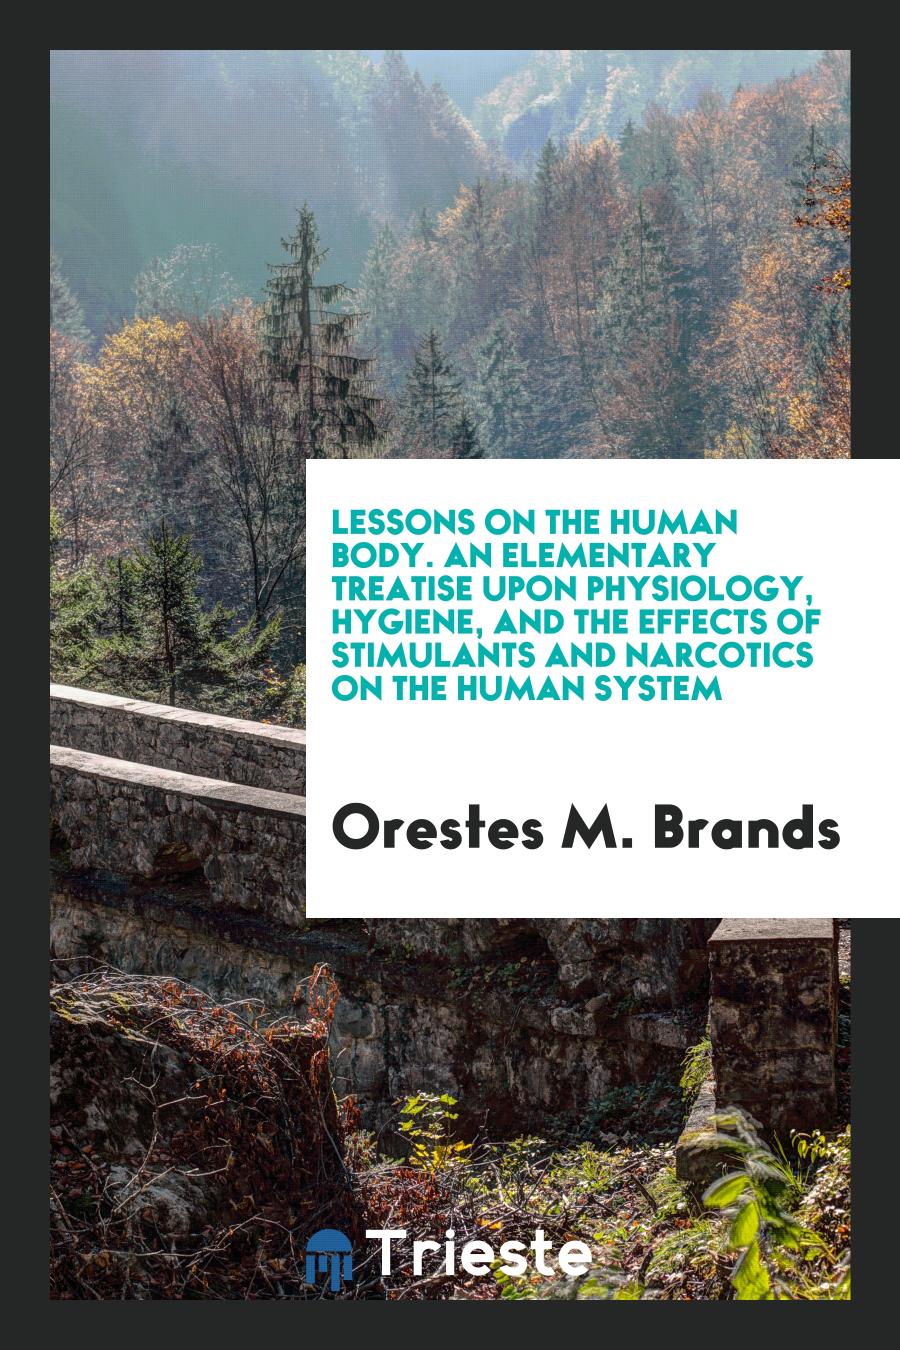 Lessons on the Human Body. An Elementary Treatise upon Physiology, Hygiene, and the Effects of Stimulants and Narcotics on the Human System